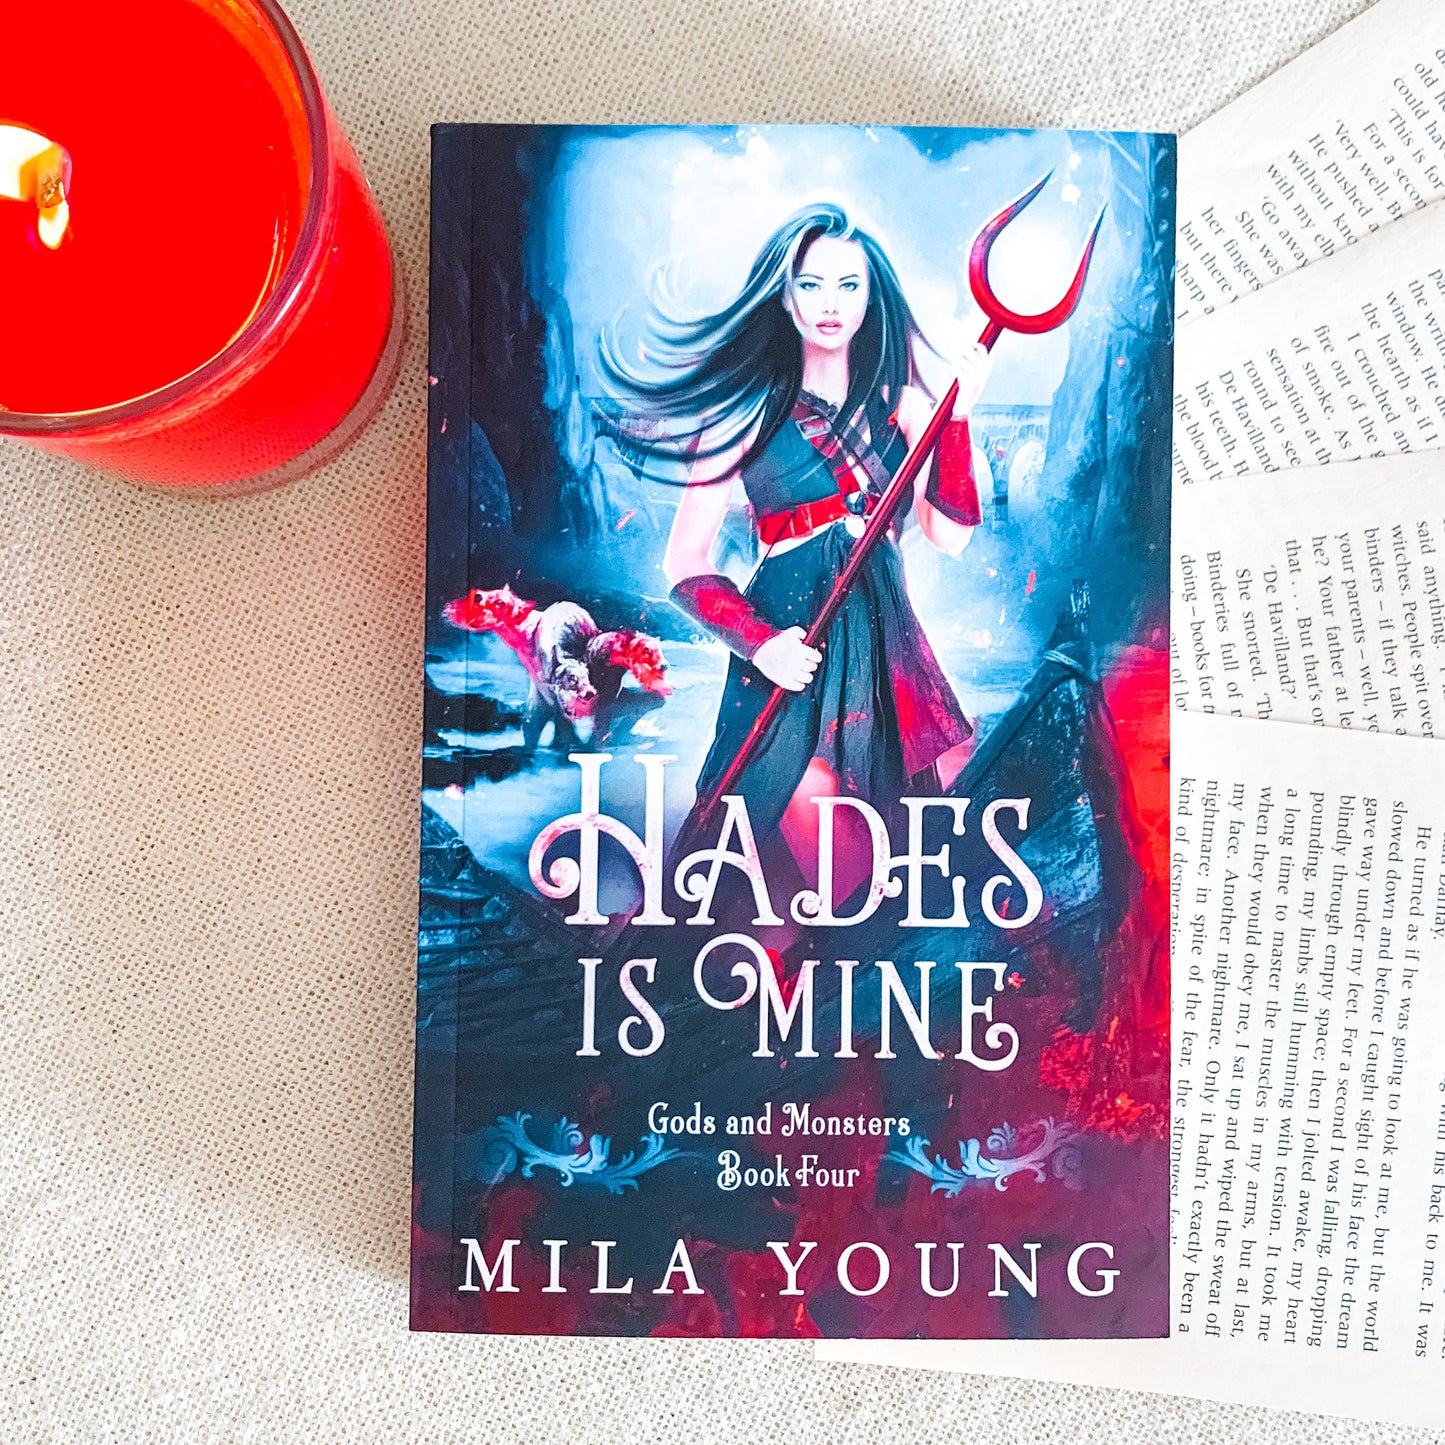 Gods and Monsters Series by Mila Young